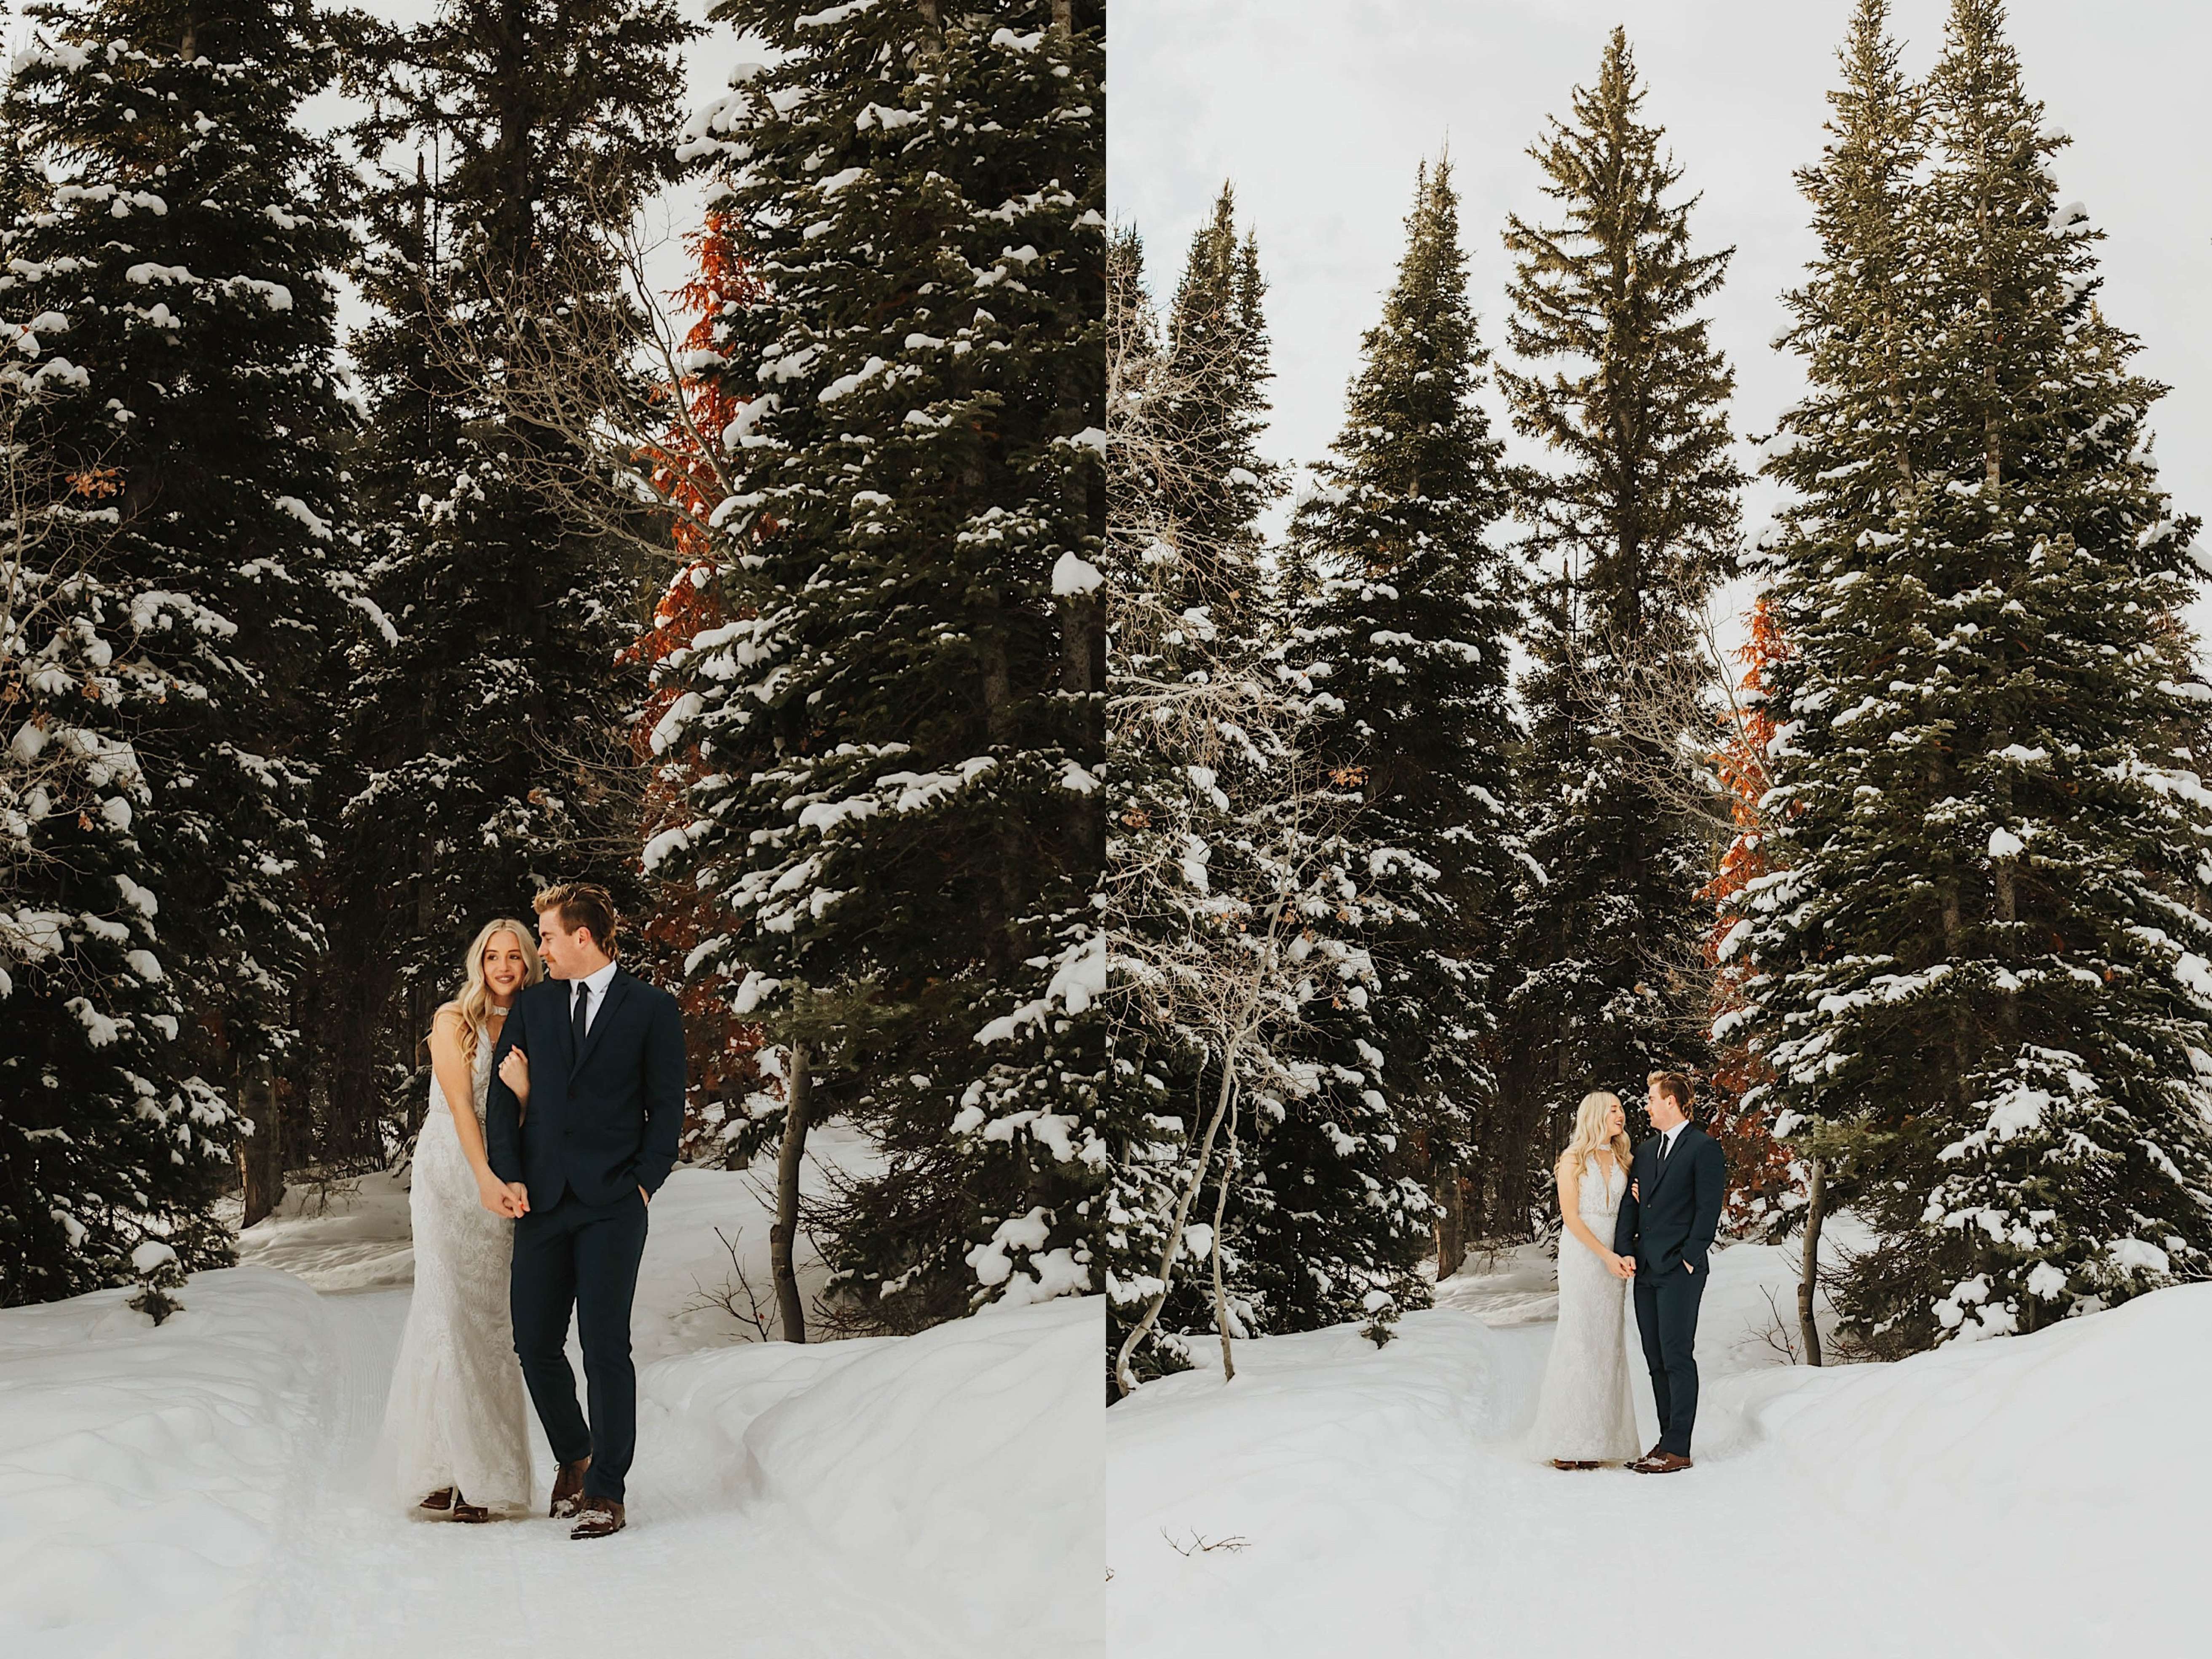 2 photos side by side of a bride and groom in a snow covered forest walking alongside one another in the trees